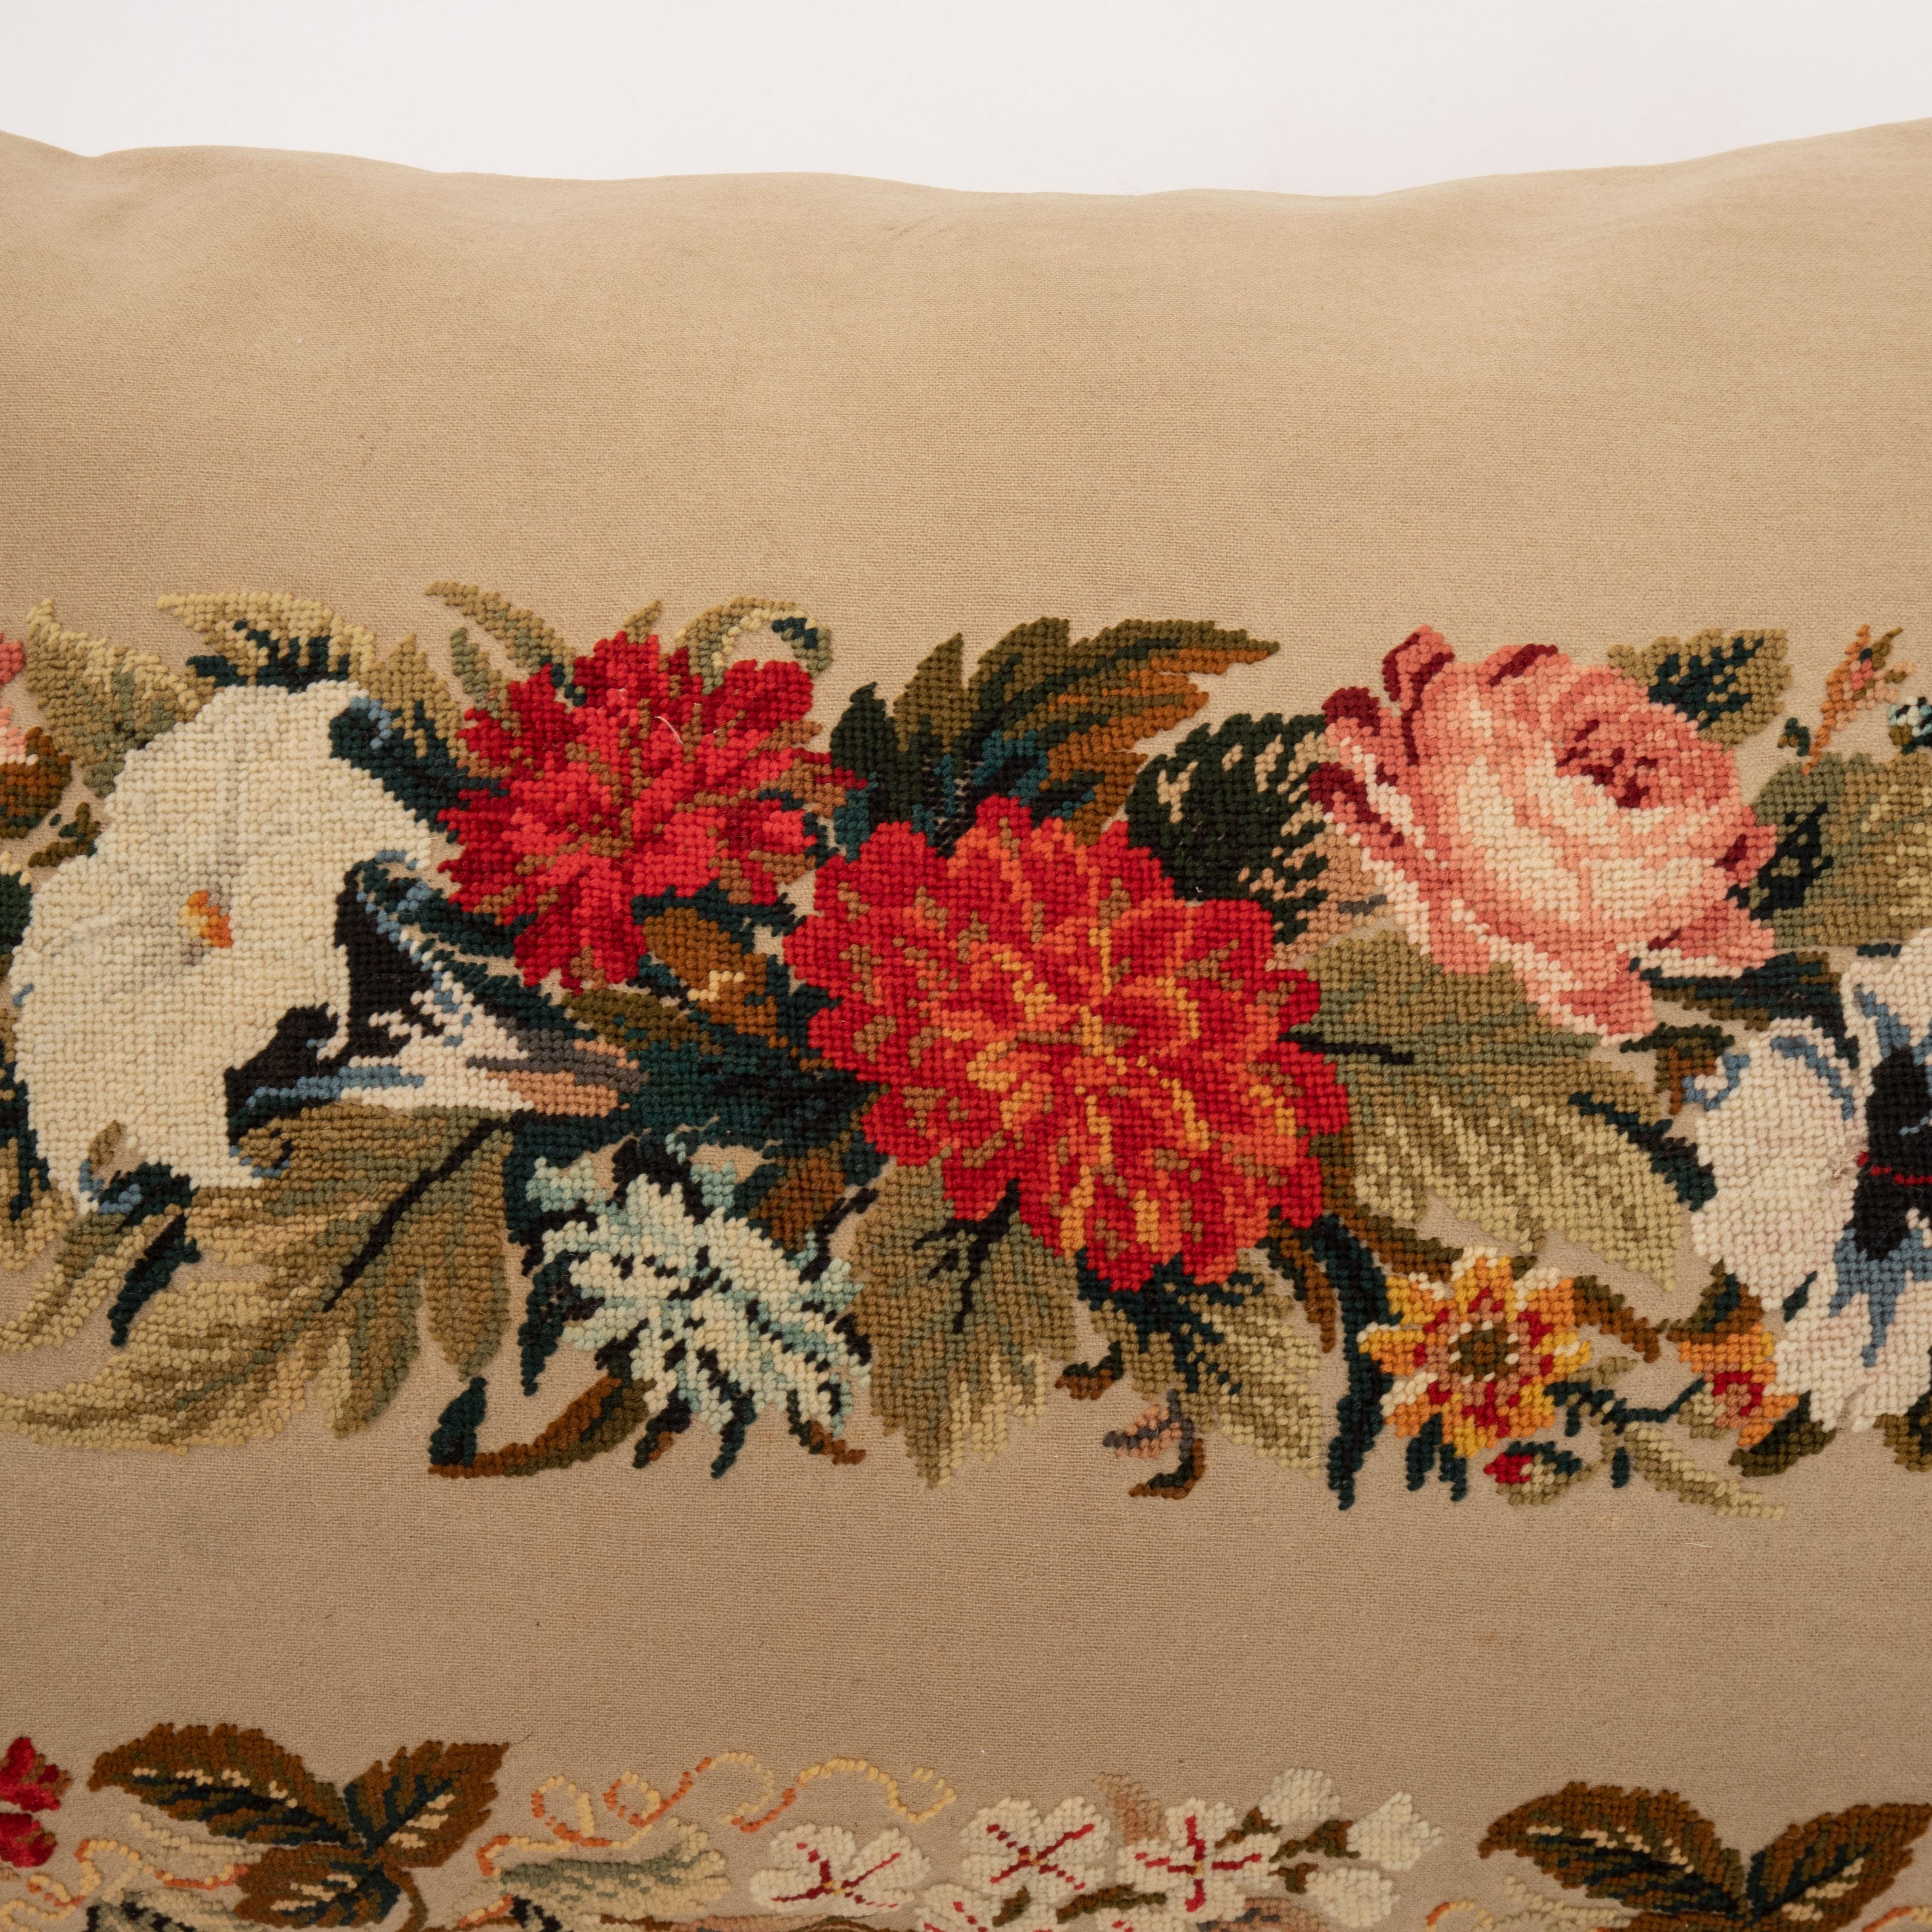 French Pillow Case Made from a European Embroidery, E 20th C.